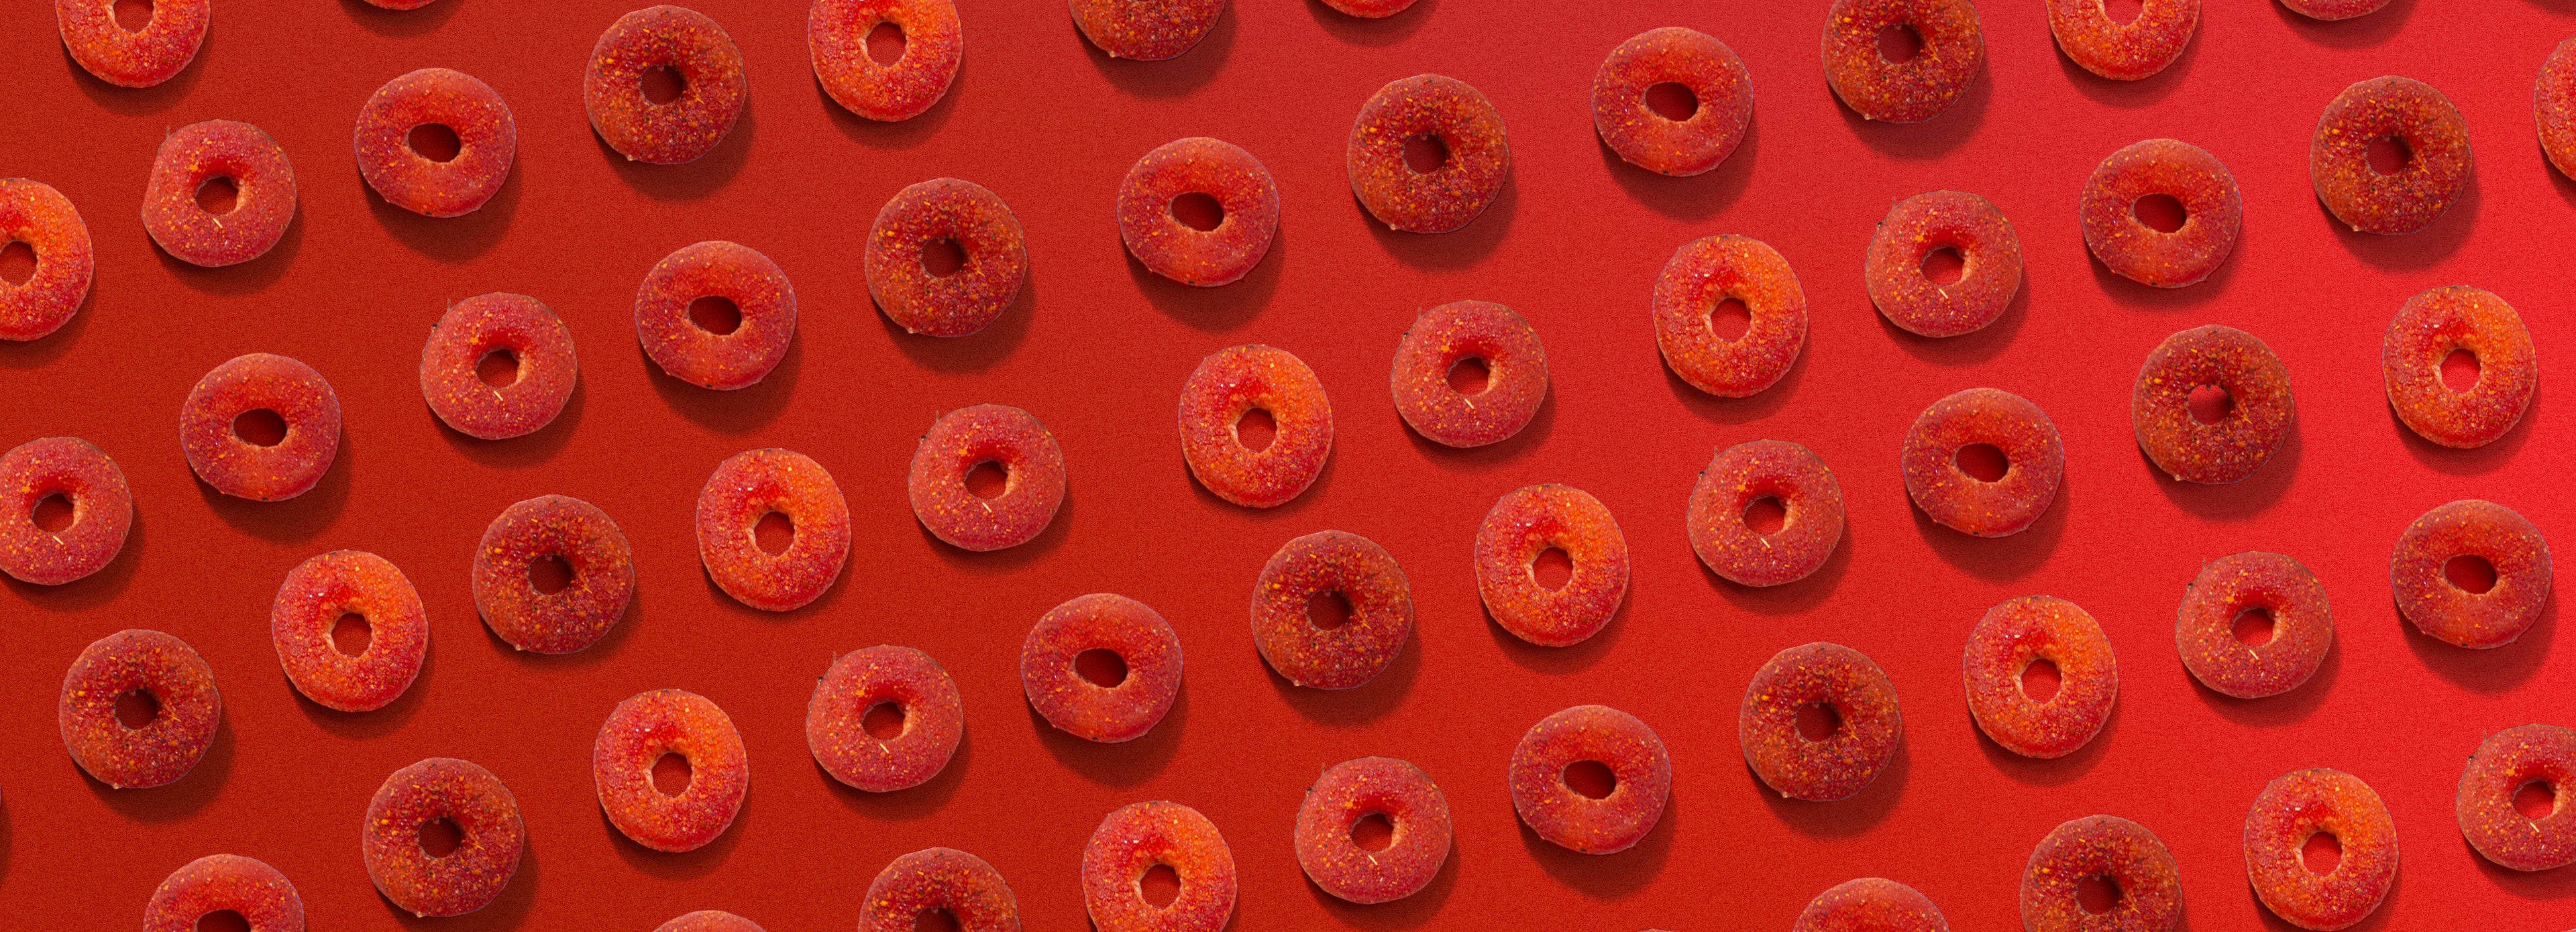 Repeating pattern of Chile Peach Rings Dulces Enchilados